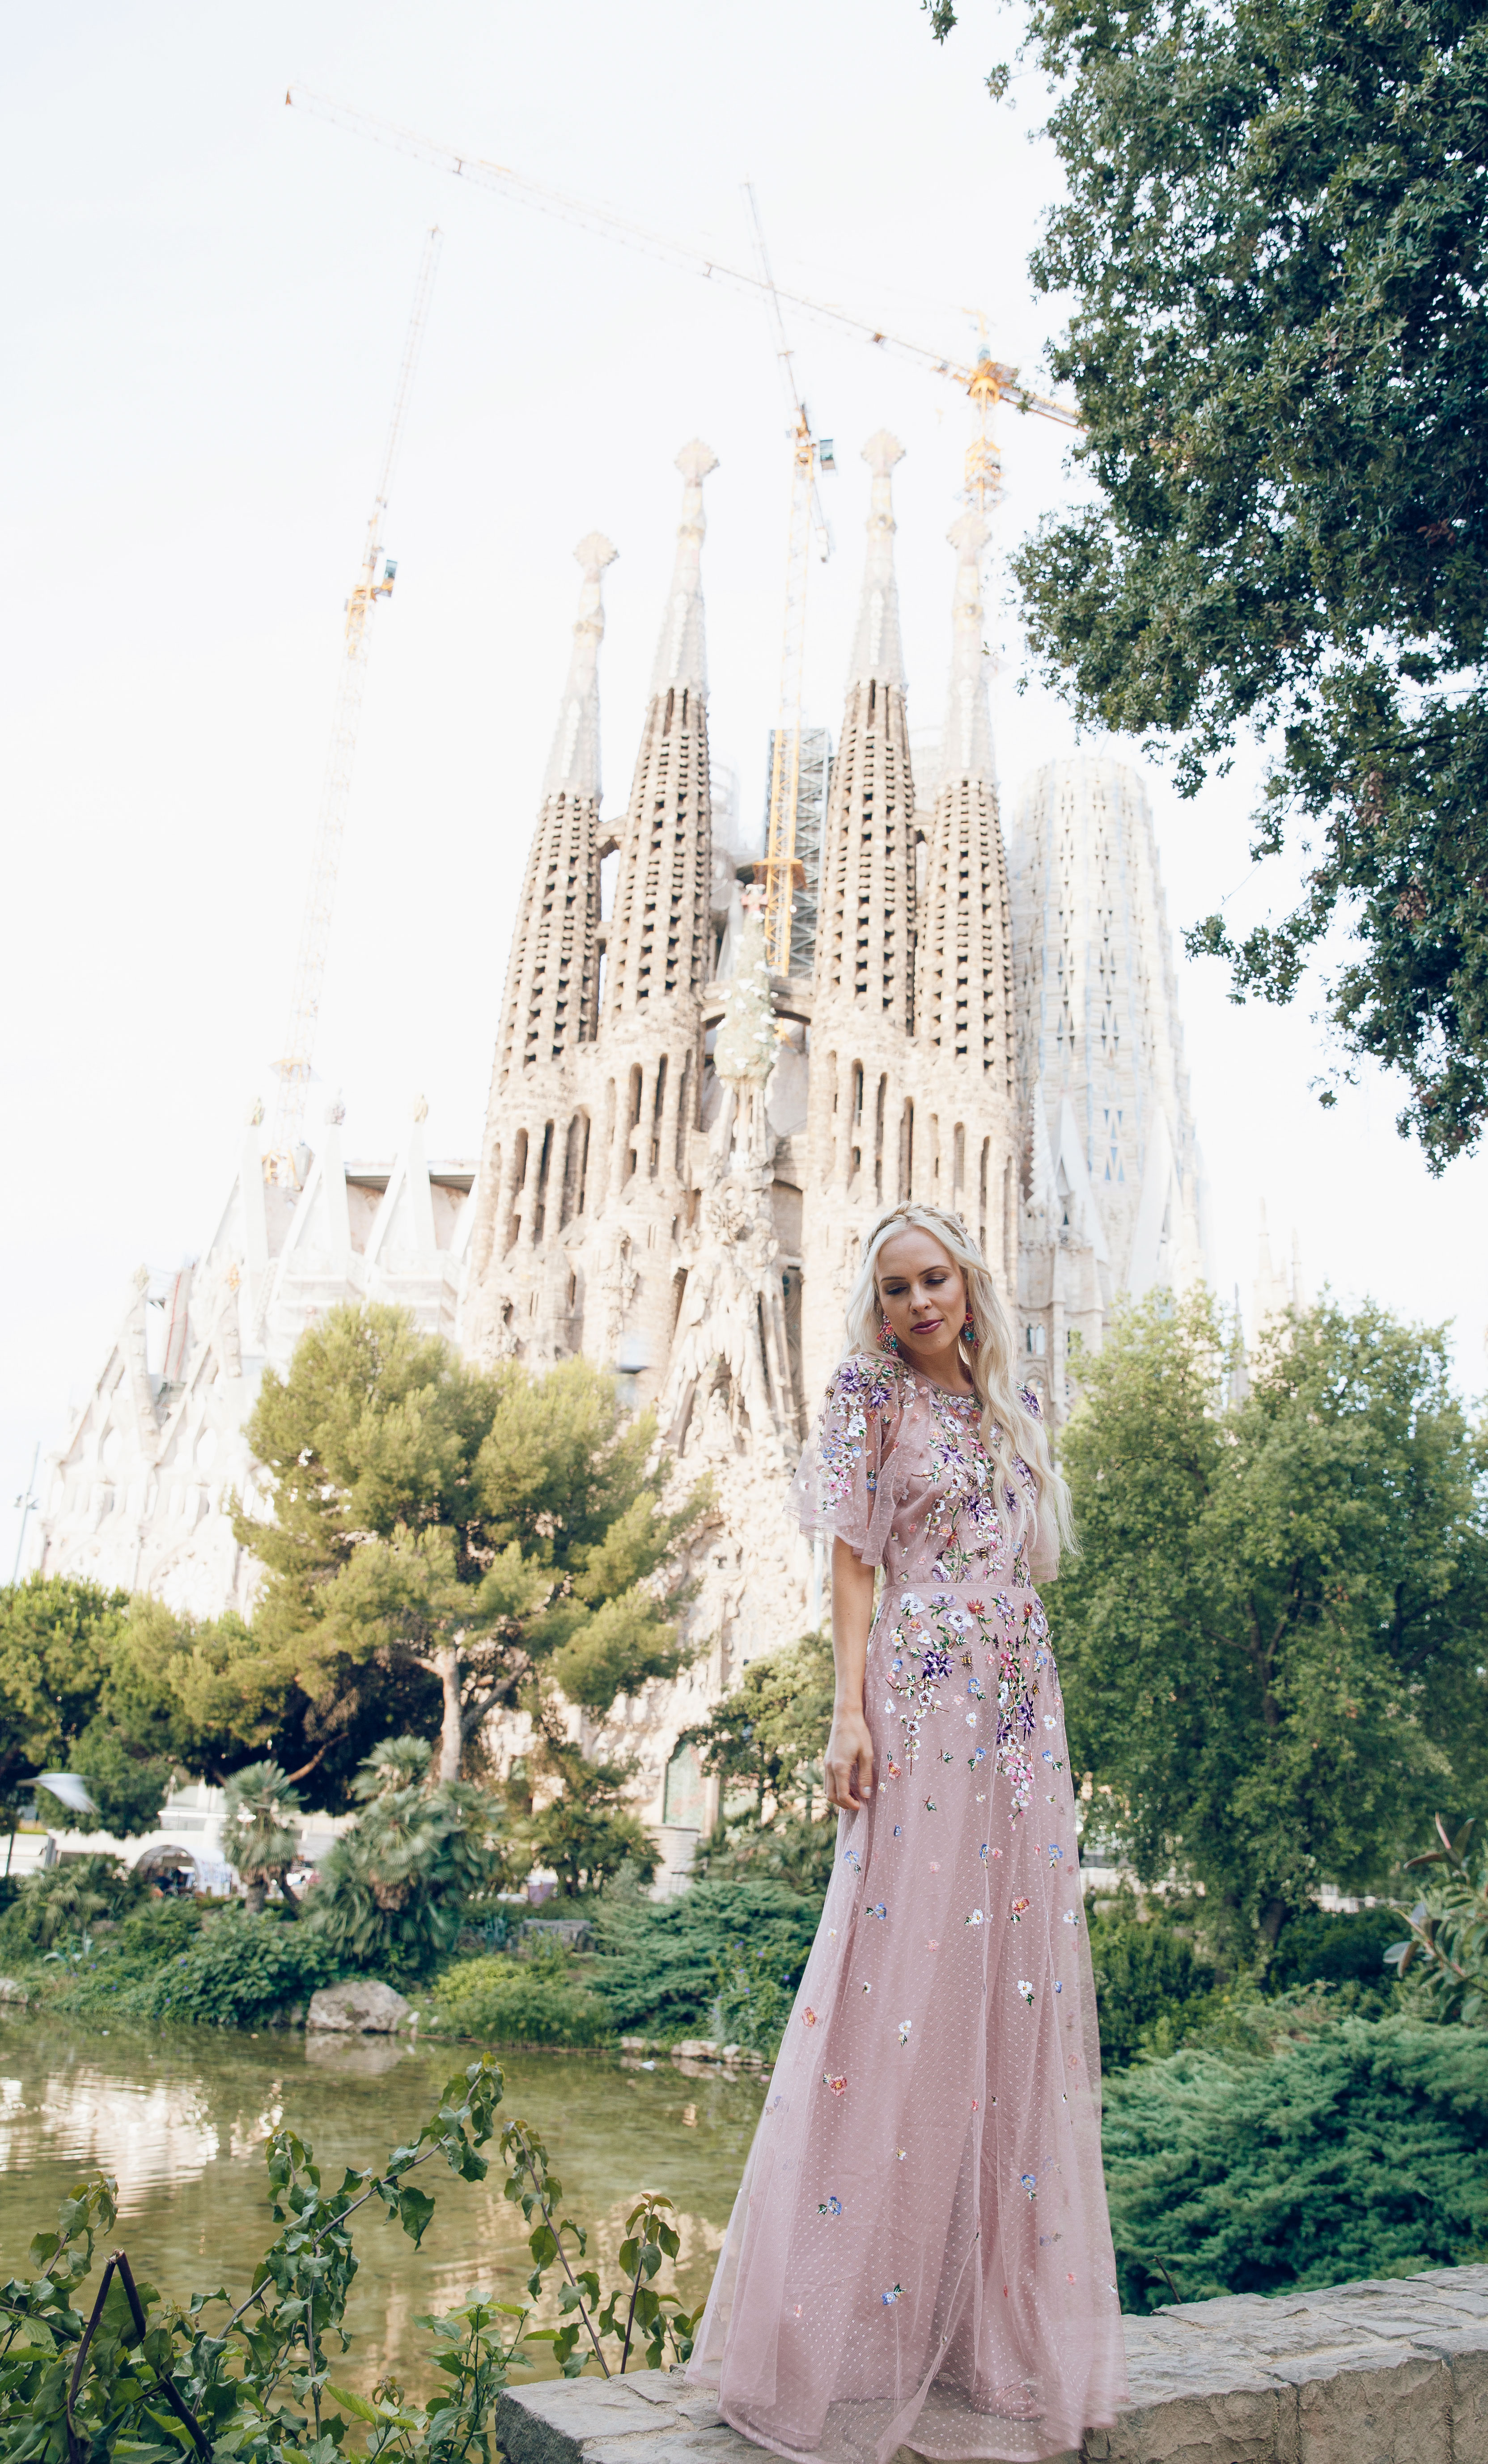 ASOS DESIGN Bridesmaid floral embroidered dobby mesh flutter sleeve maxi dress in barcelona | ASOS floral embroidered maxi dress featured by top San Francisco fashion blog, Lombard and Fifth: image of a blonde woman wearing a floral maxi dress at the Colosseum in Rome